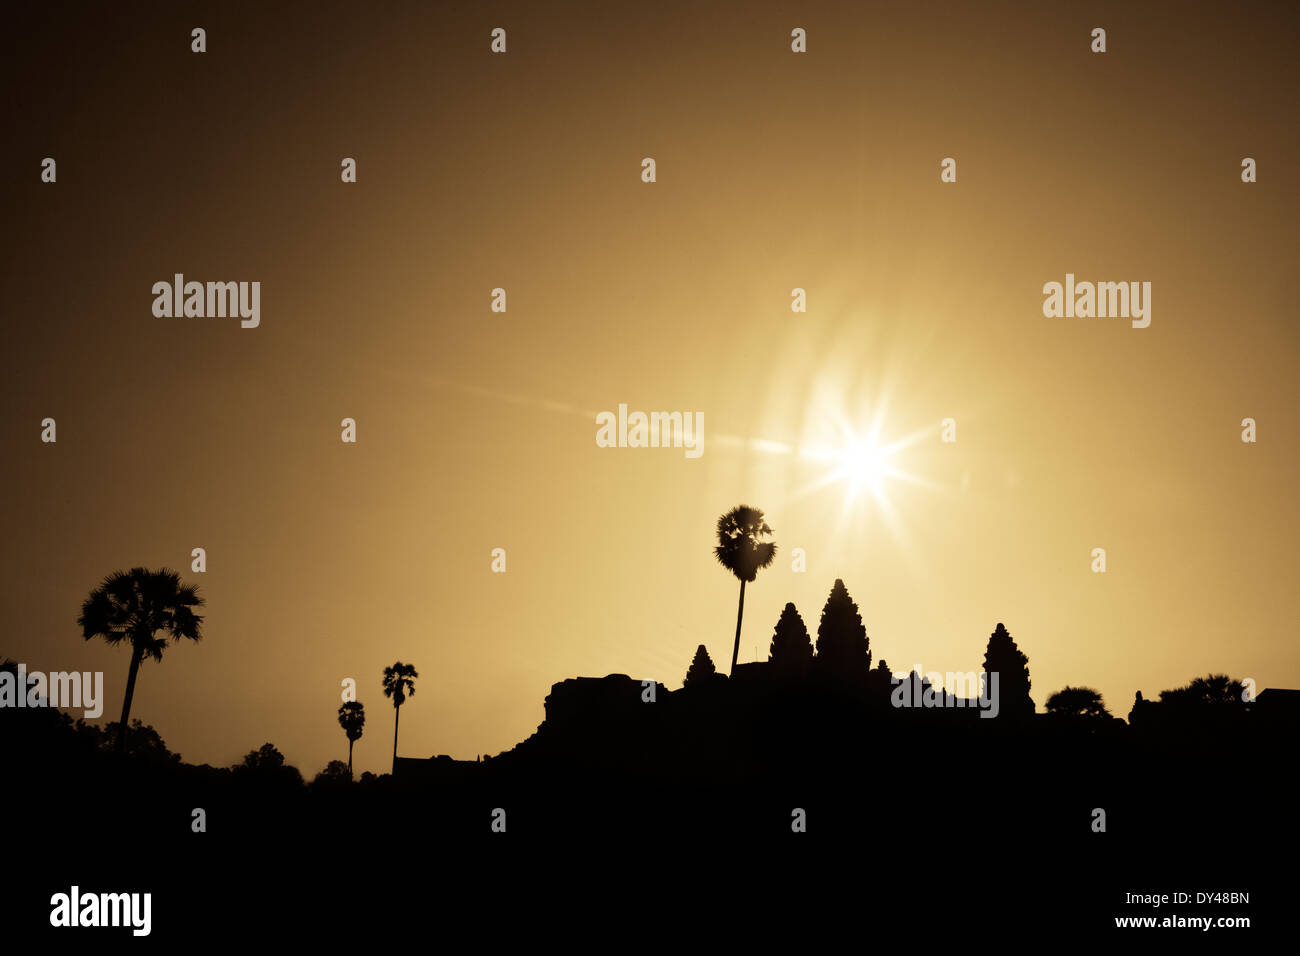 Angkor Wat temple silhouette Stock Photo